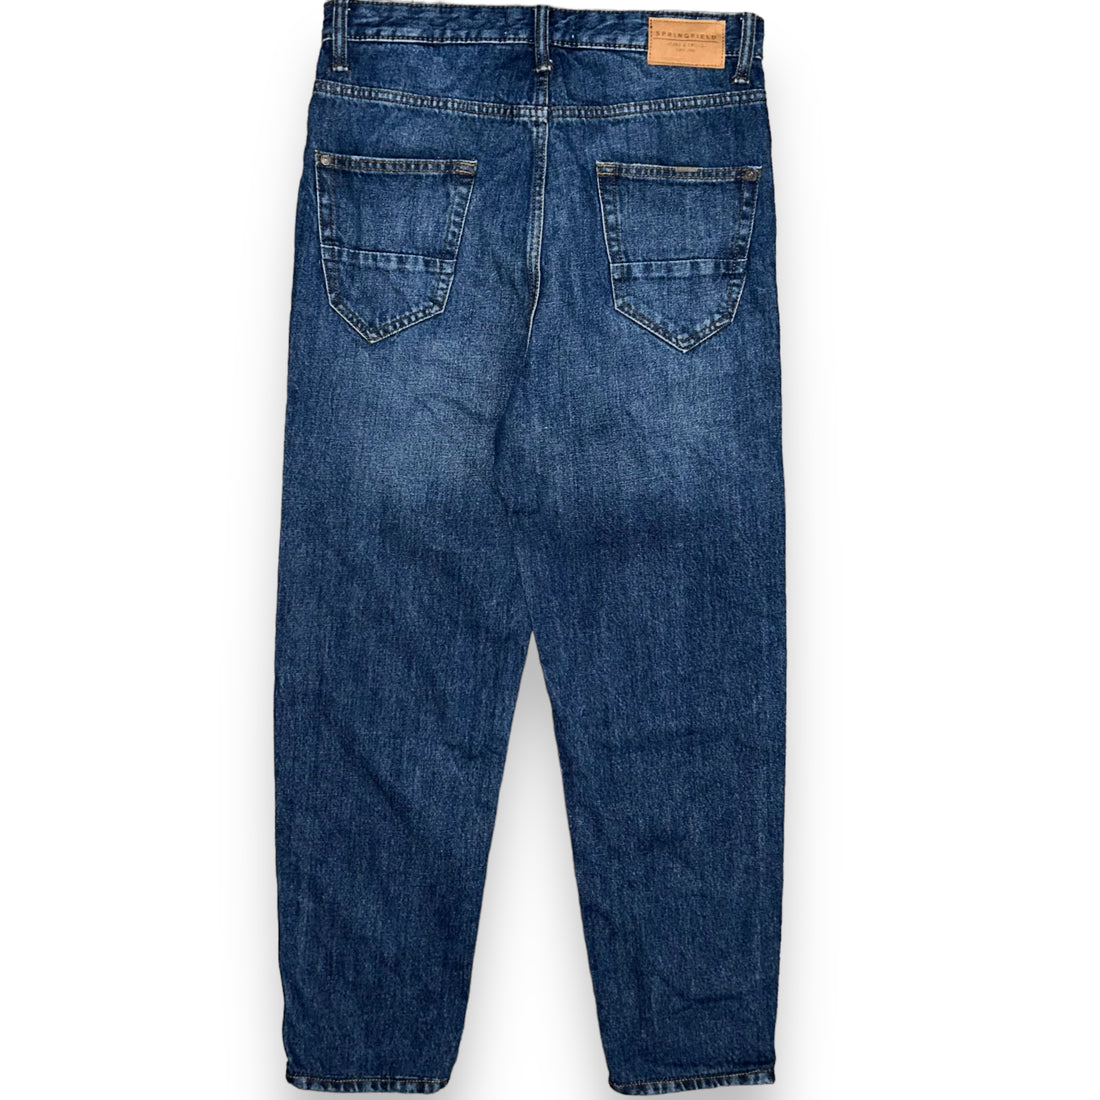 Springfield jeans (30 US S)